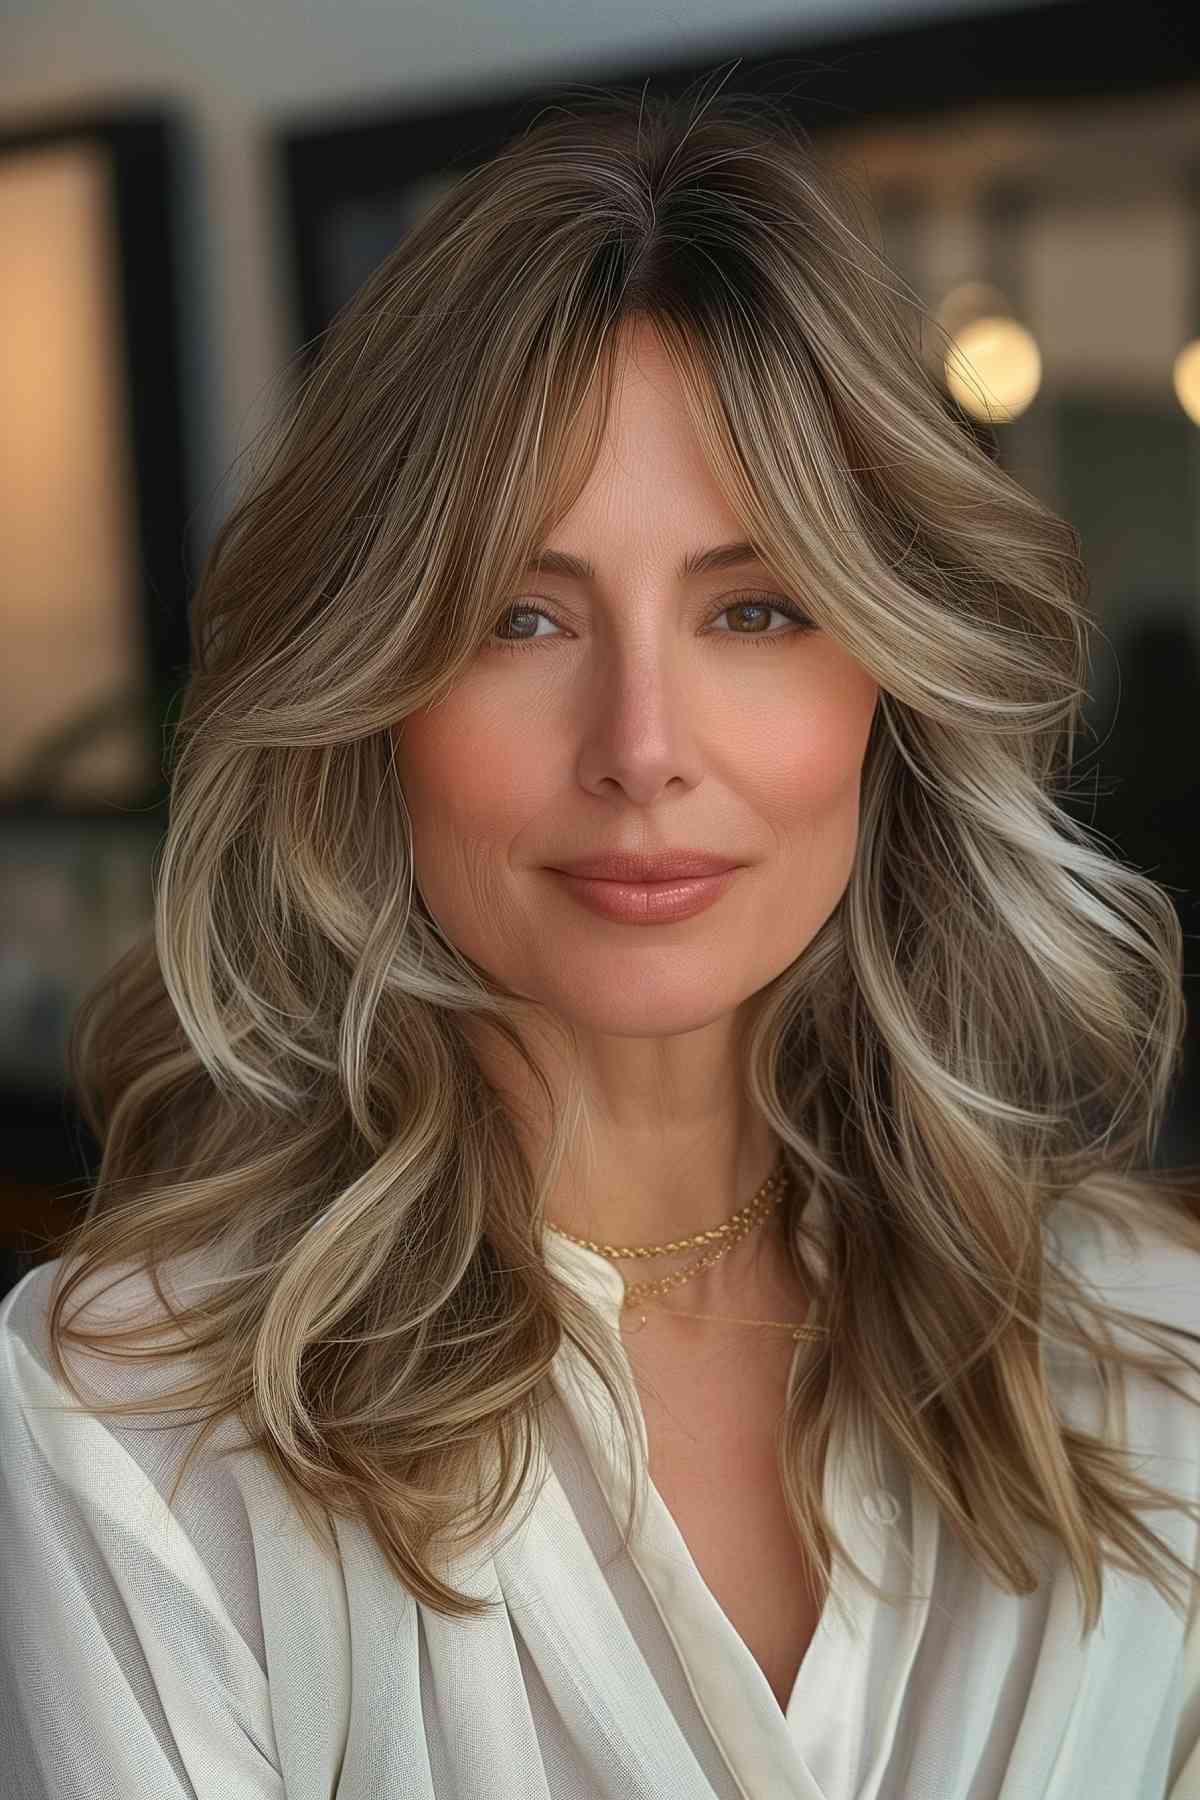 Woman over 50 with feathered layers and curtain bangs hairstyle, giving volume and a soft frame to an oval face shape.